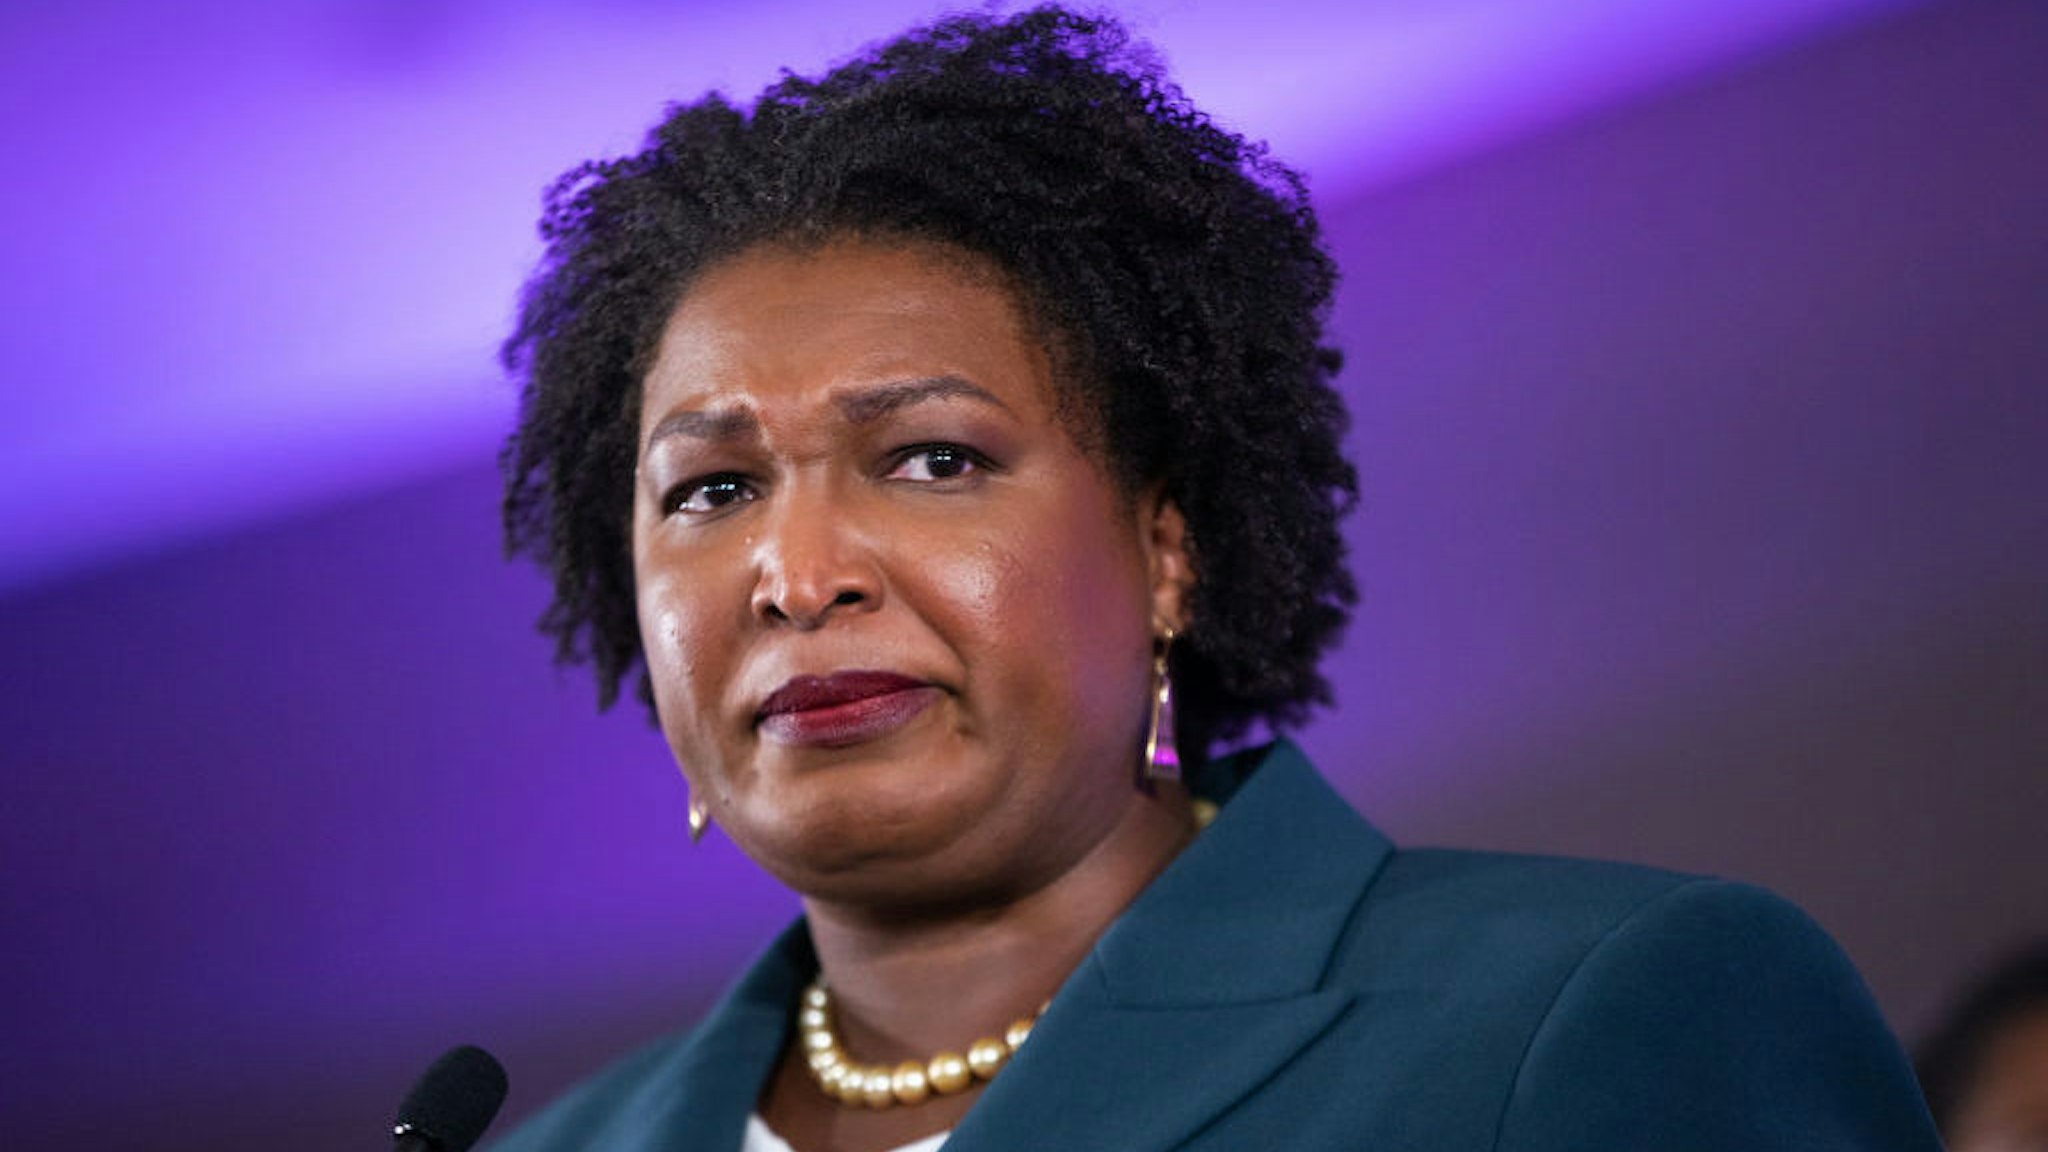 Stacey Abrams, Democratic gubernatorial candidate for Georgia, during an election night rally in Atlanta, Georgia, US, on Tuesday, Nov. 8, 2022. Abrams conceded to Governor Brian Kemp on Tuesday in a rematch of their 2018 race, reported the Associated Press. Photographer: Photographer: Dustin Chambers/Bloomberg